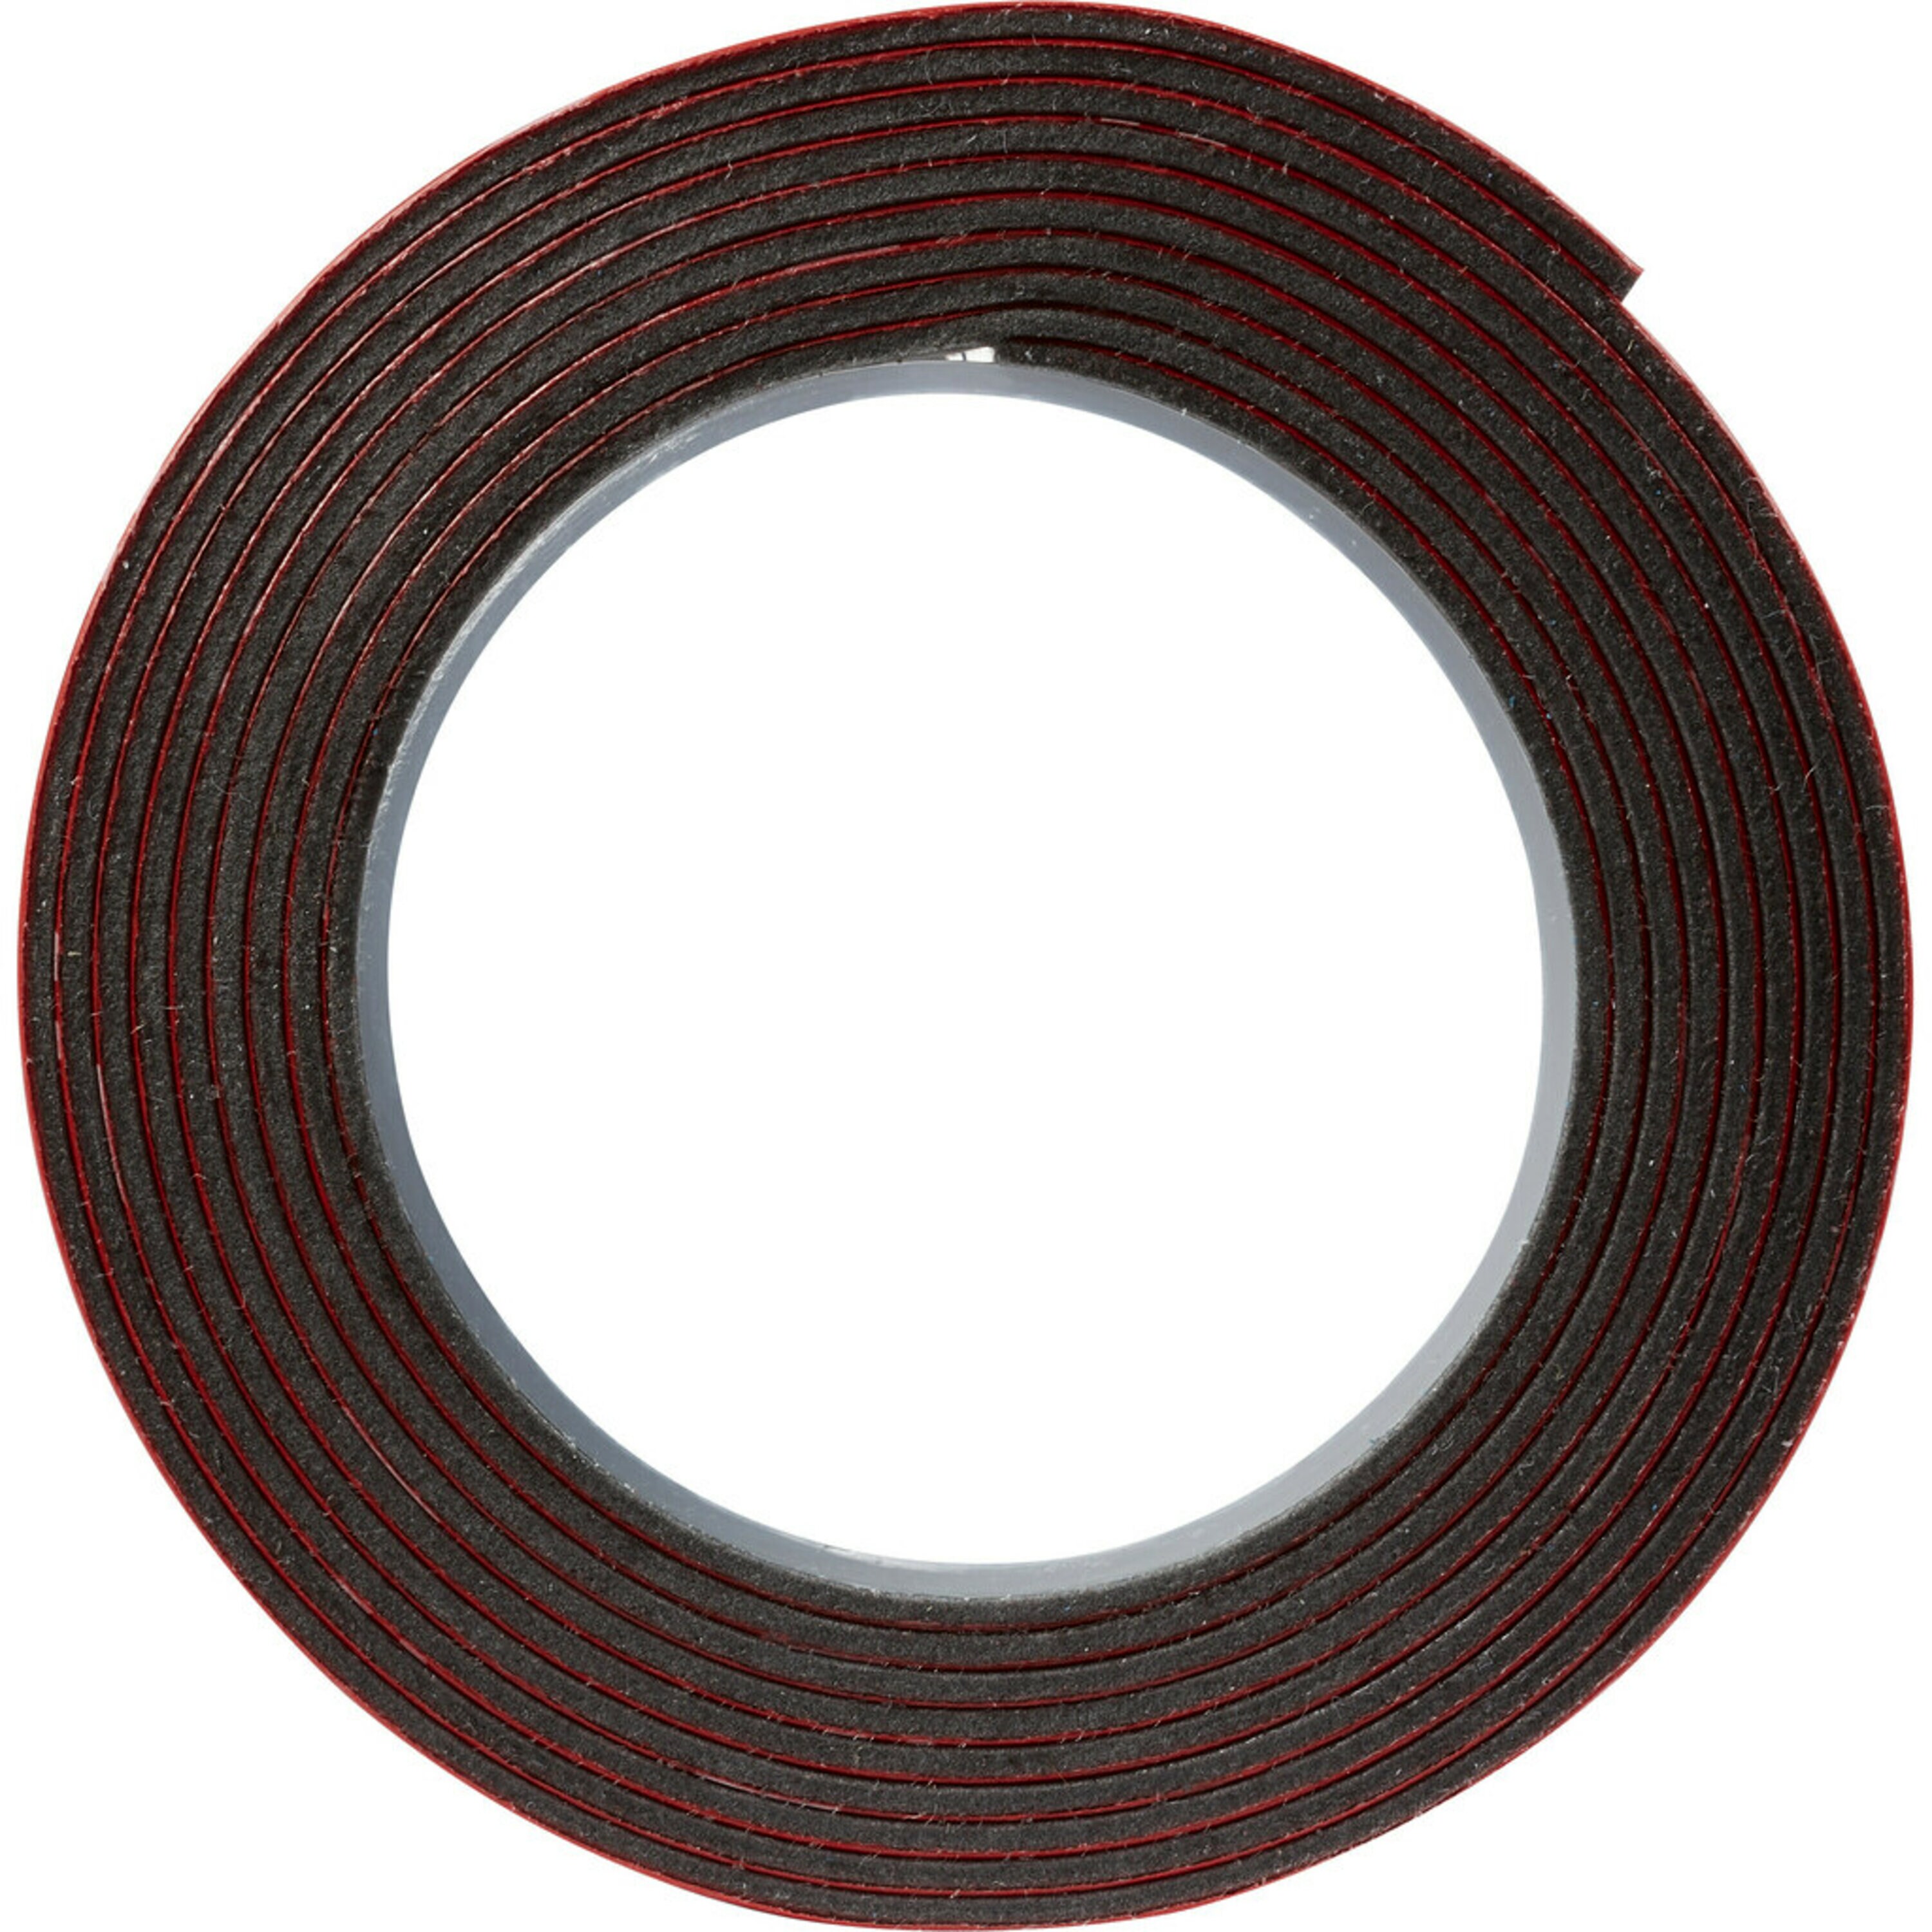 3M™ Super Strength Molding Tape 03615, 7/8 in x ft, Roll